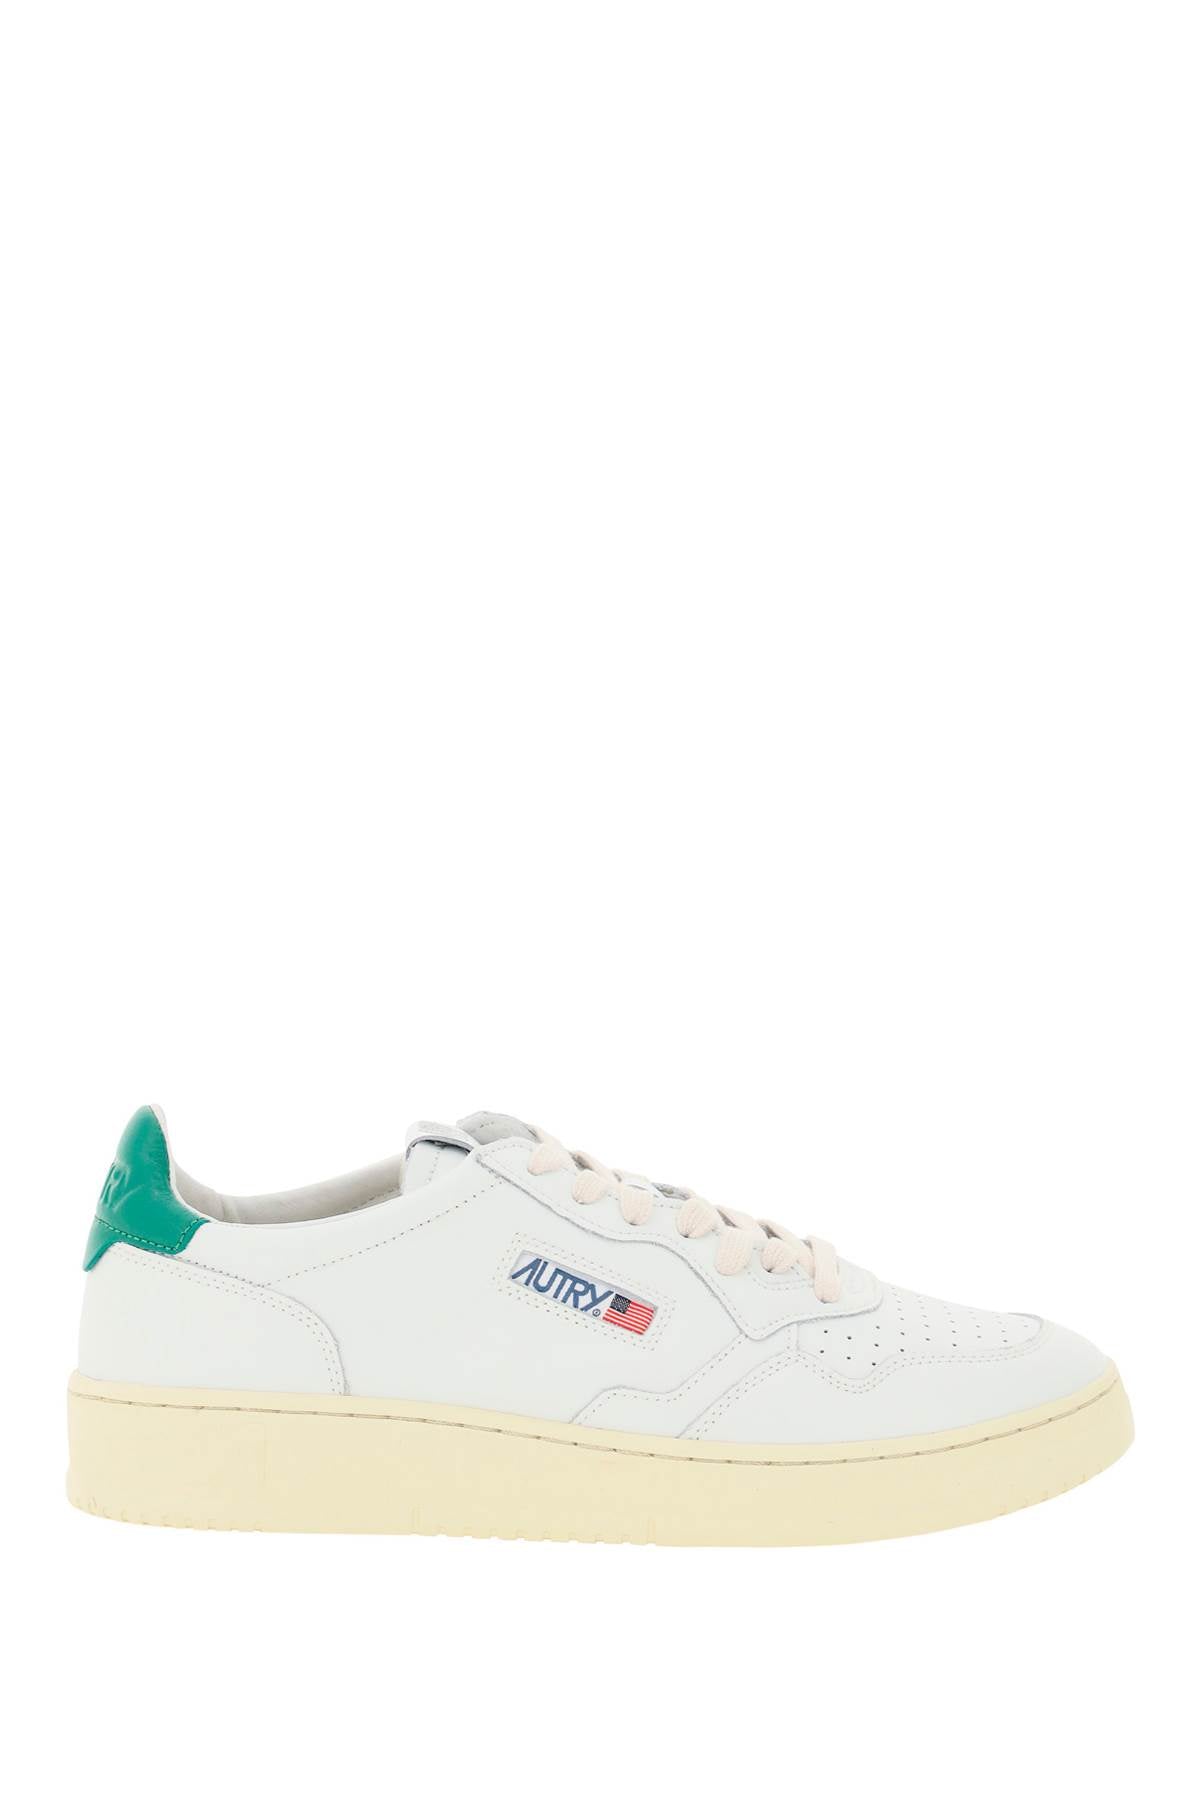 Autry leather medalist low sneakers AULMLL20 WHITE GREEN